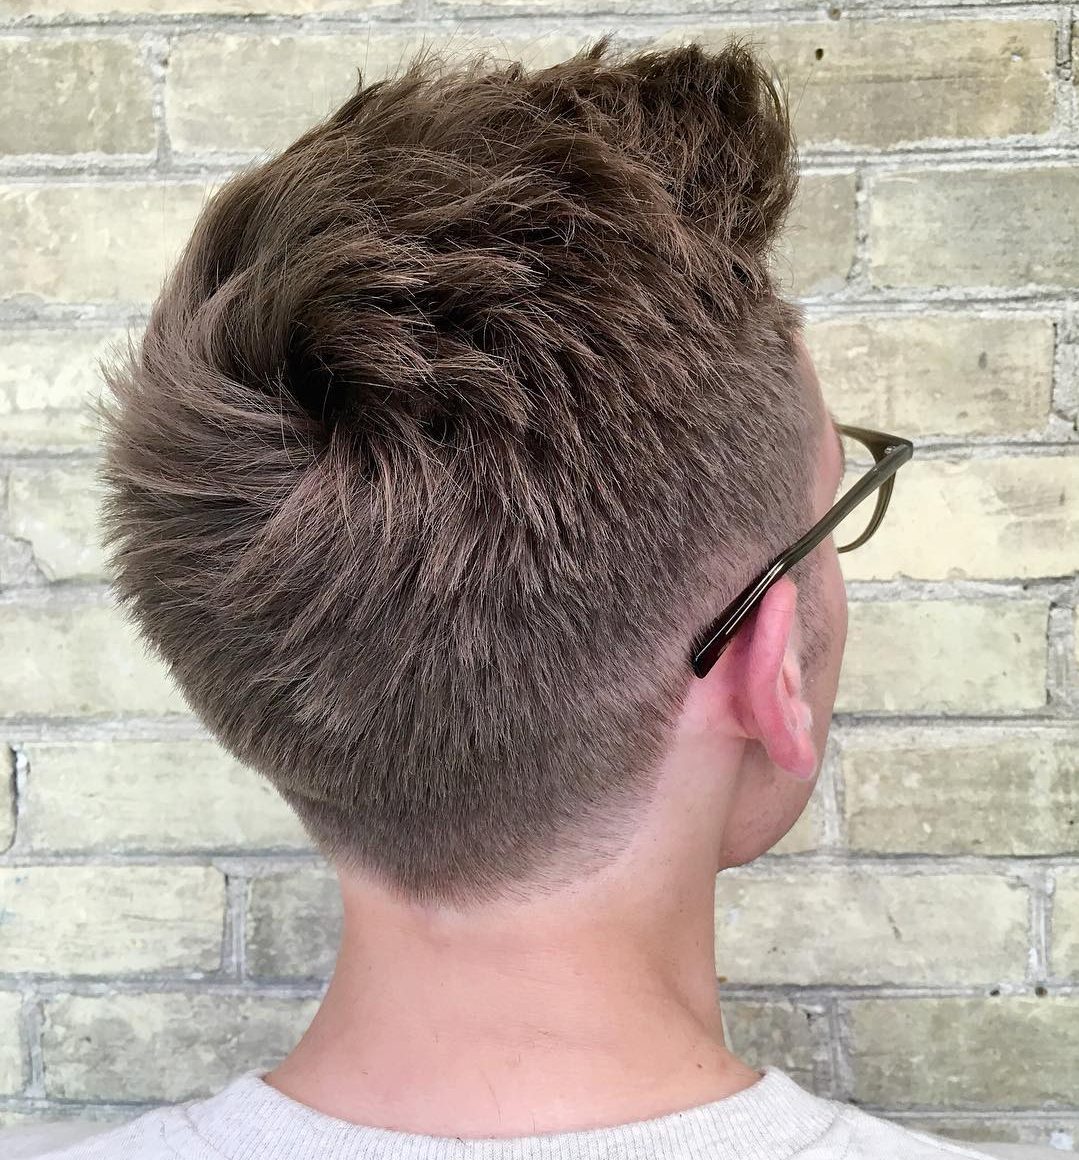 Thick textured haircut with low fade